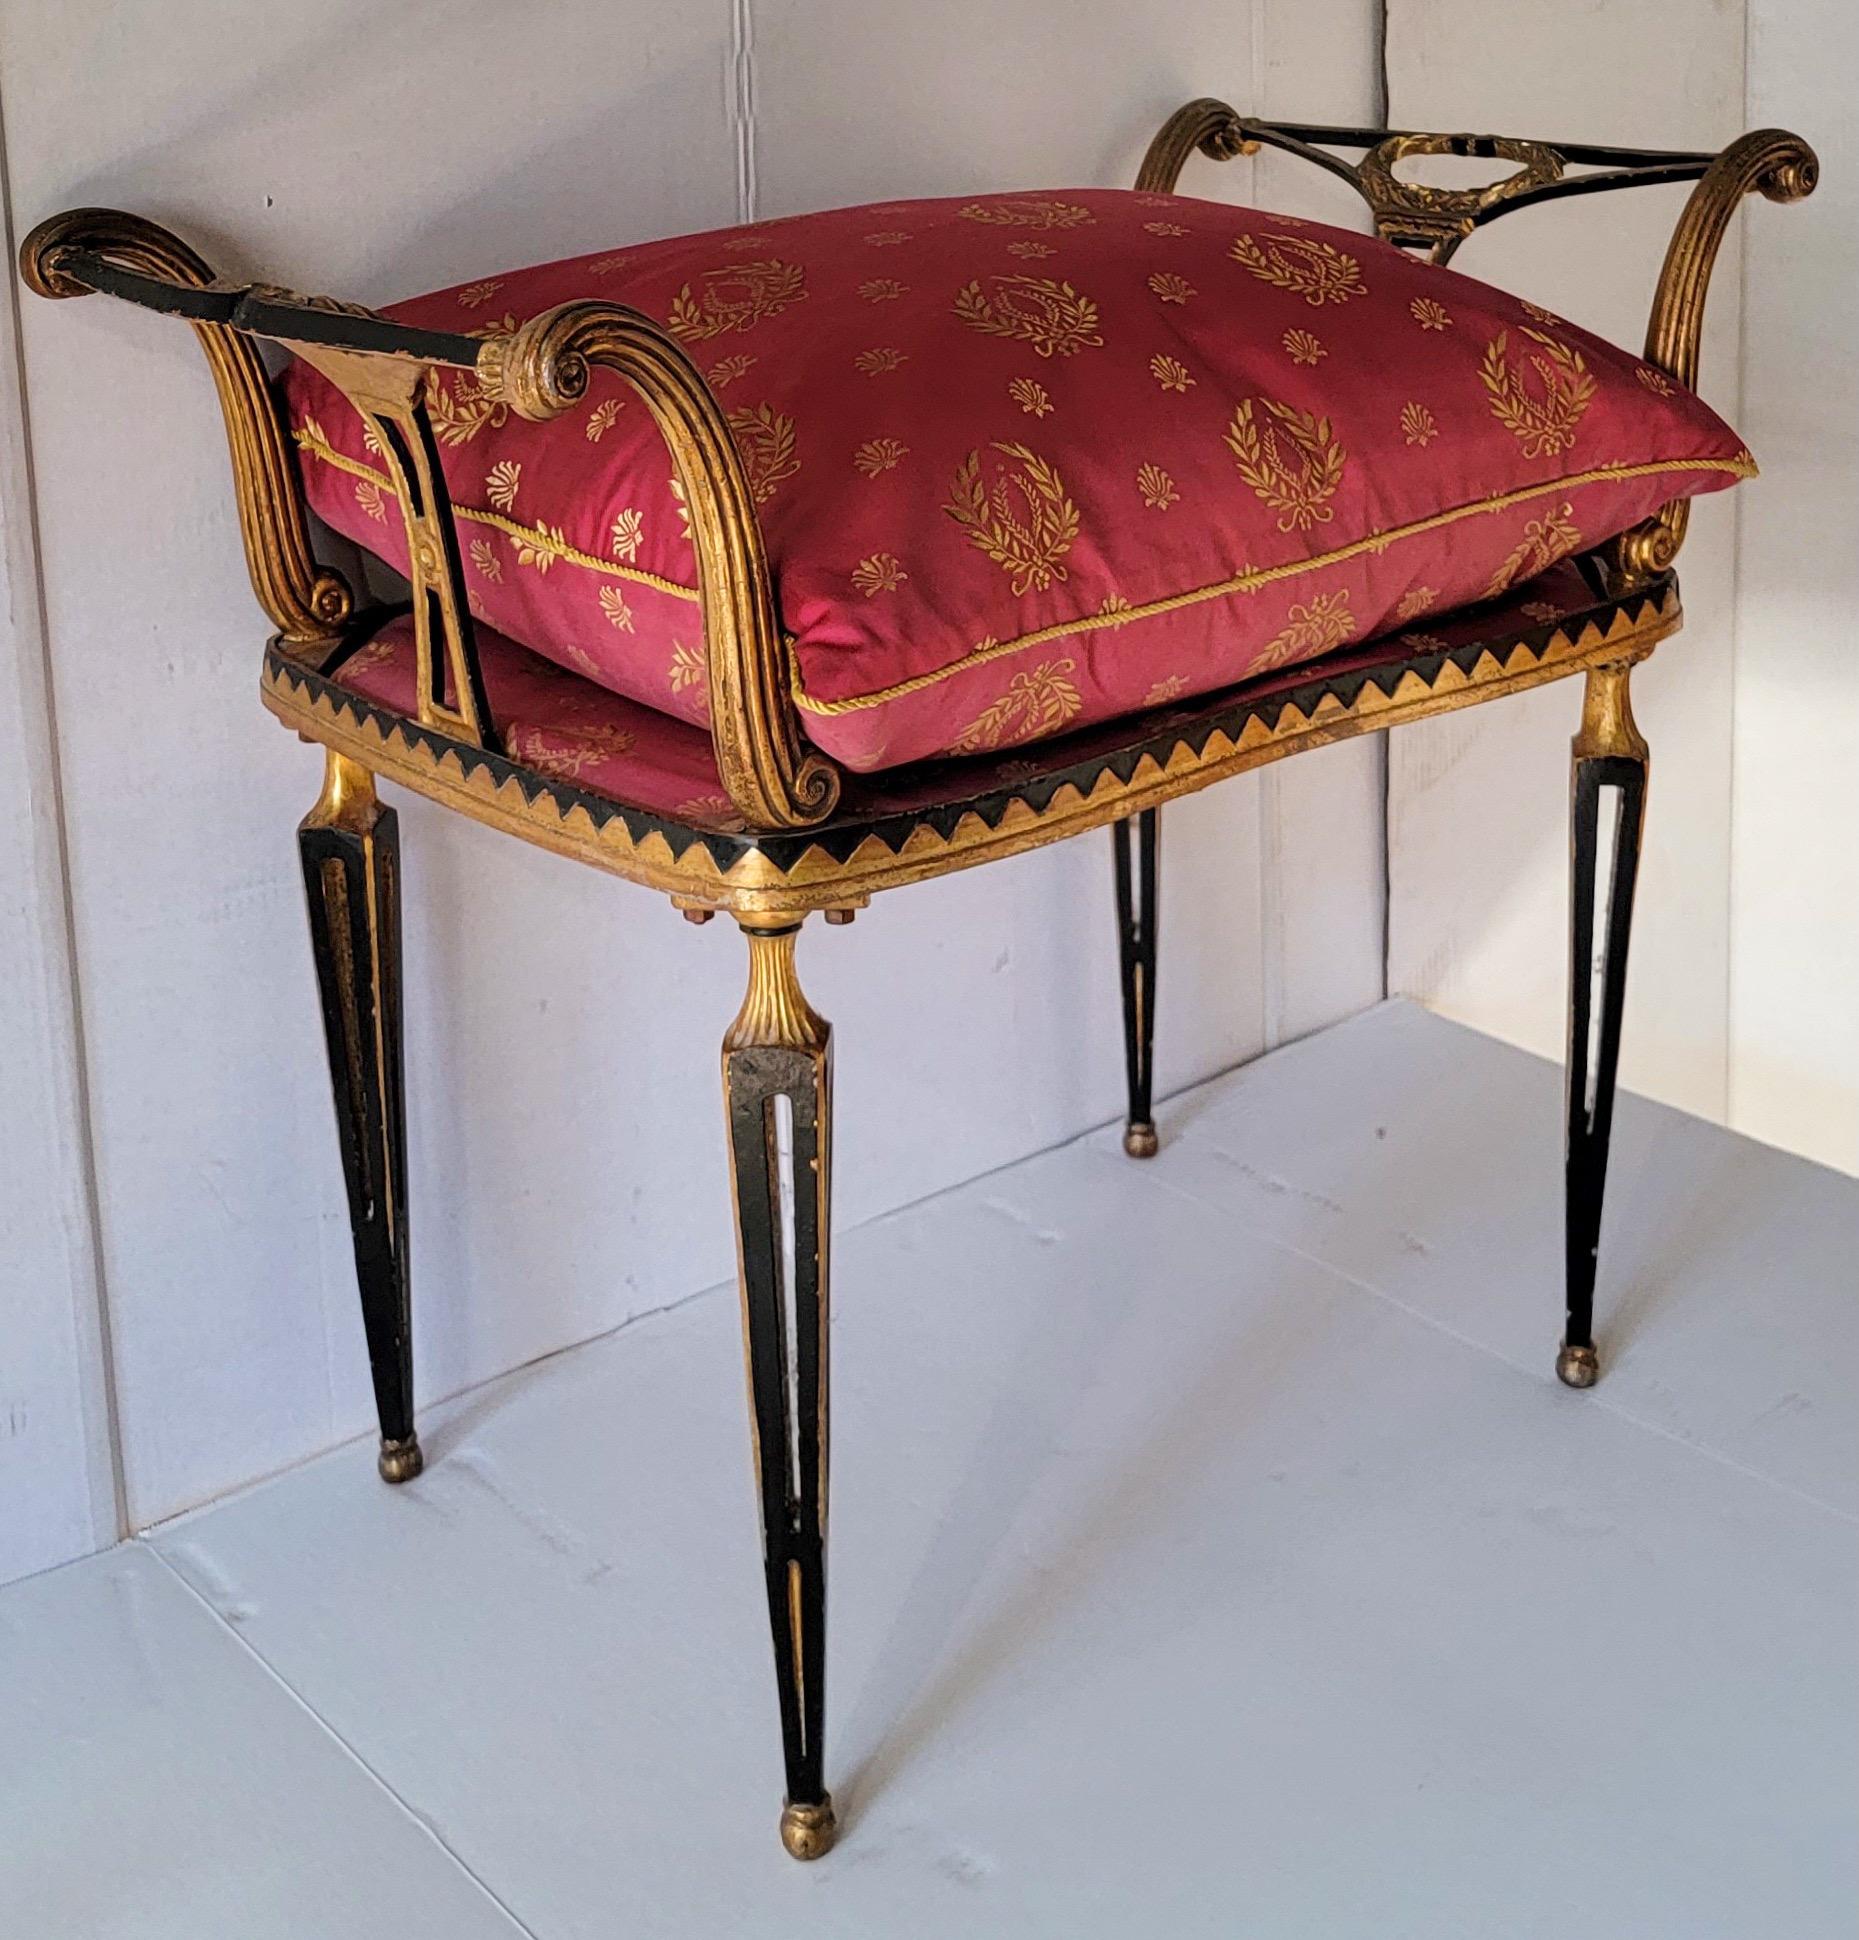 1950s Italian Regency Style Gilt Metal Tole Painted Bench in French Silk For Sale 3